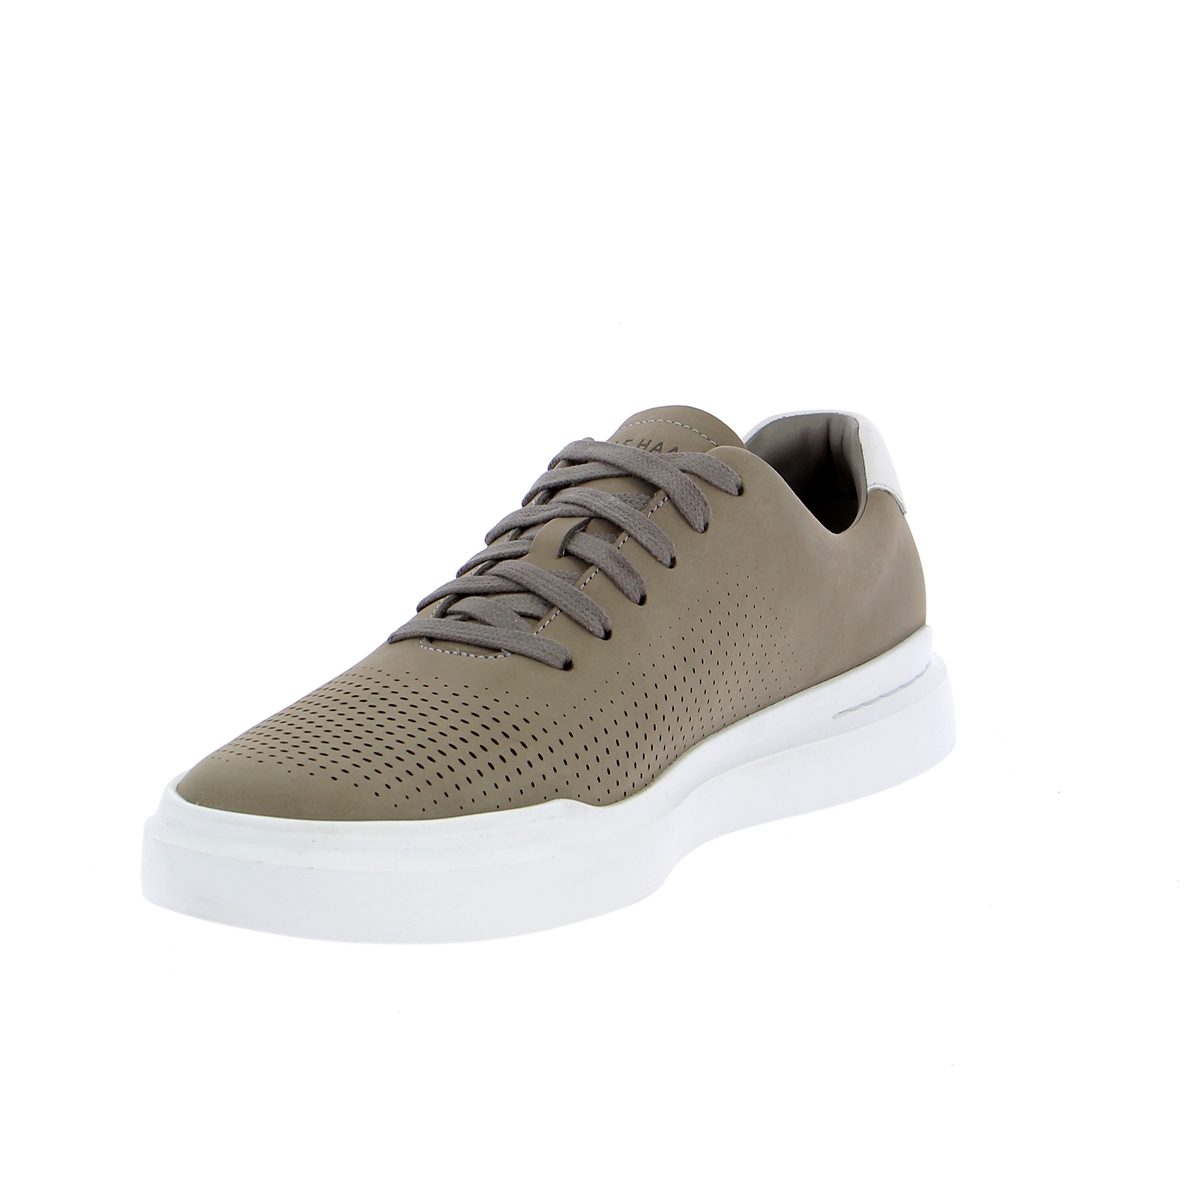 Cole Haan Basket taupe